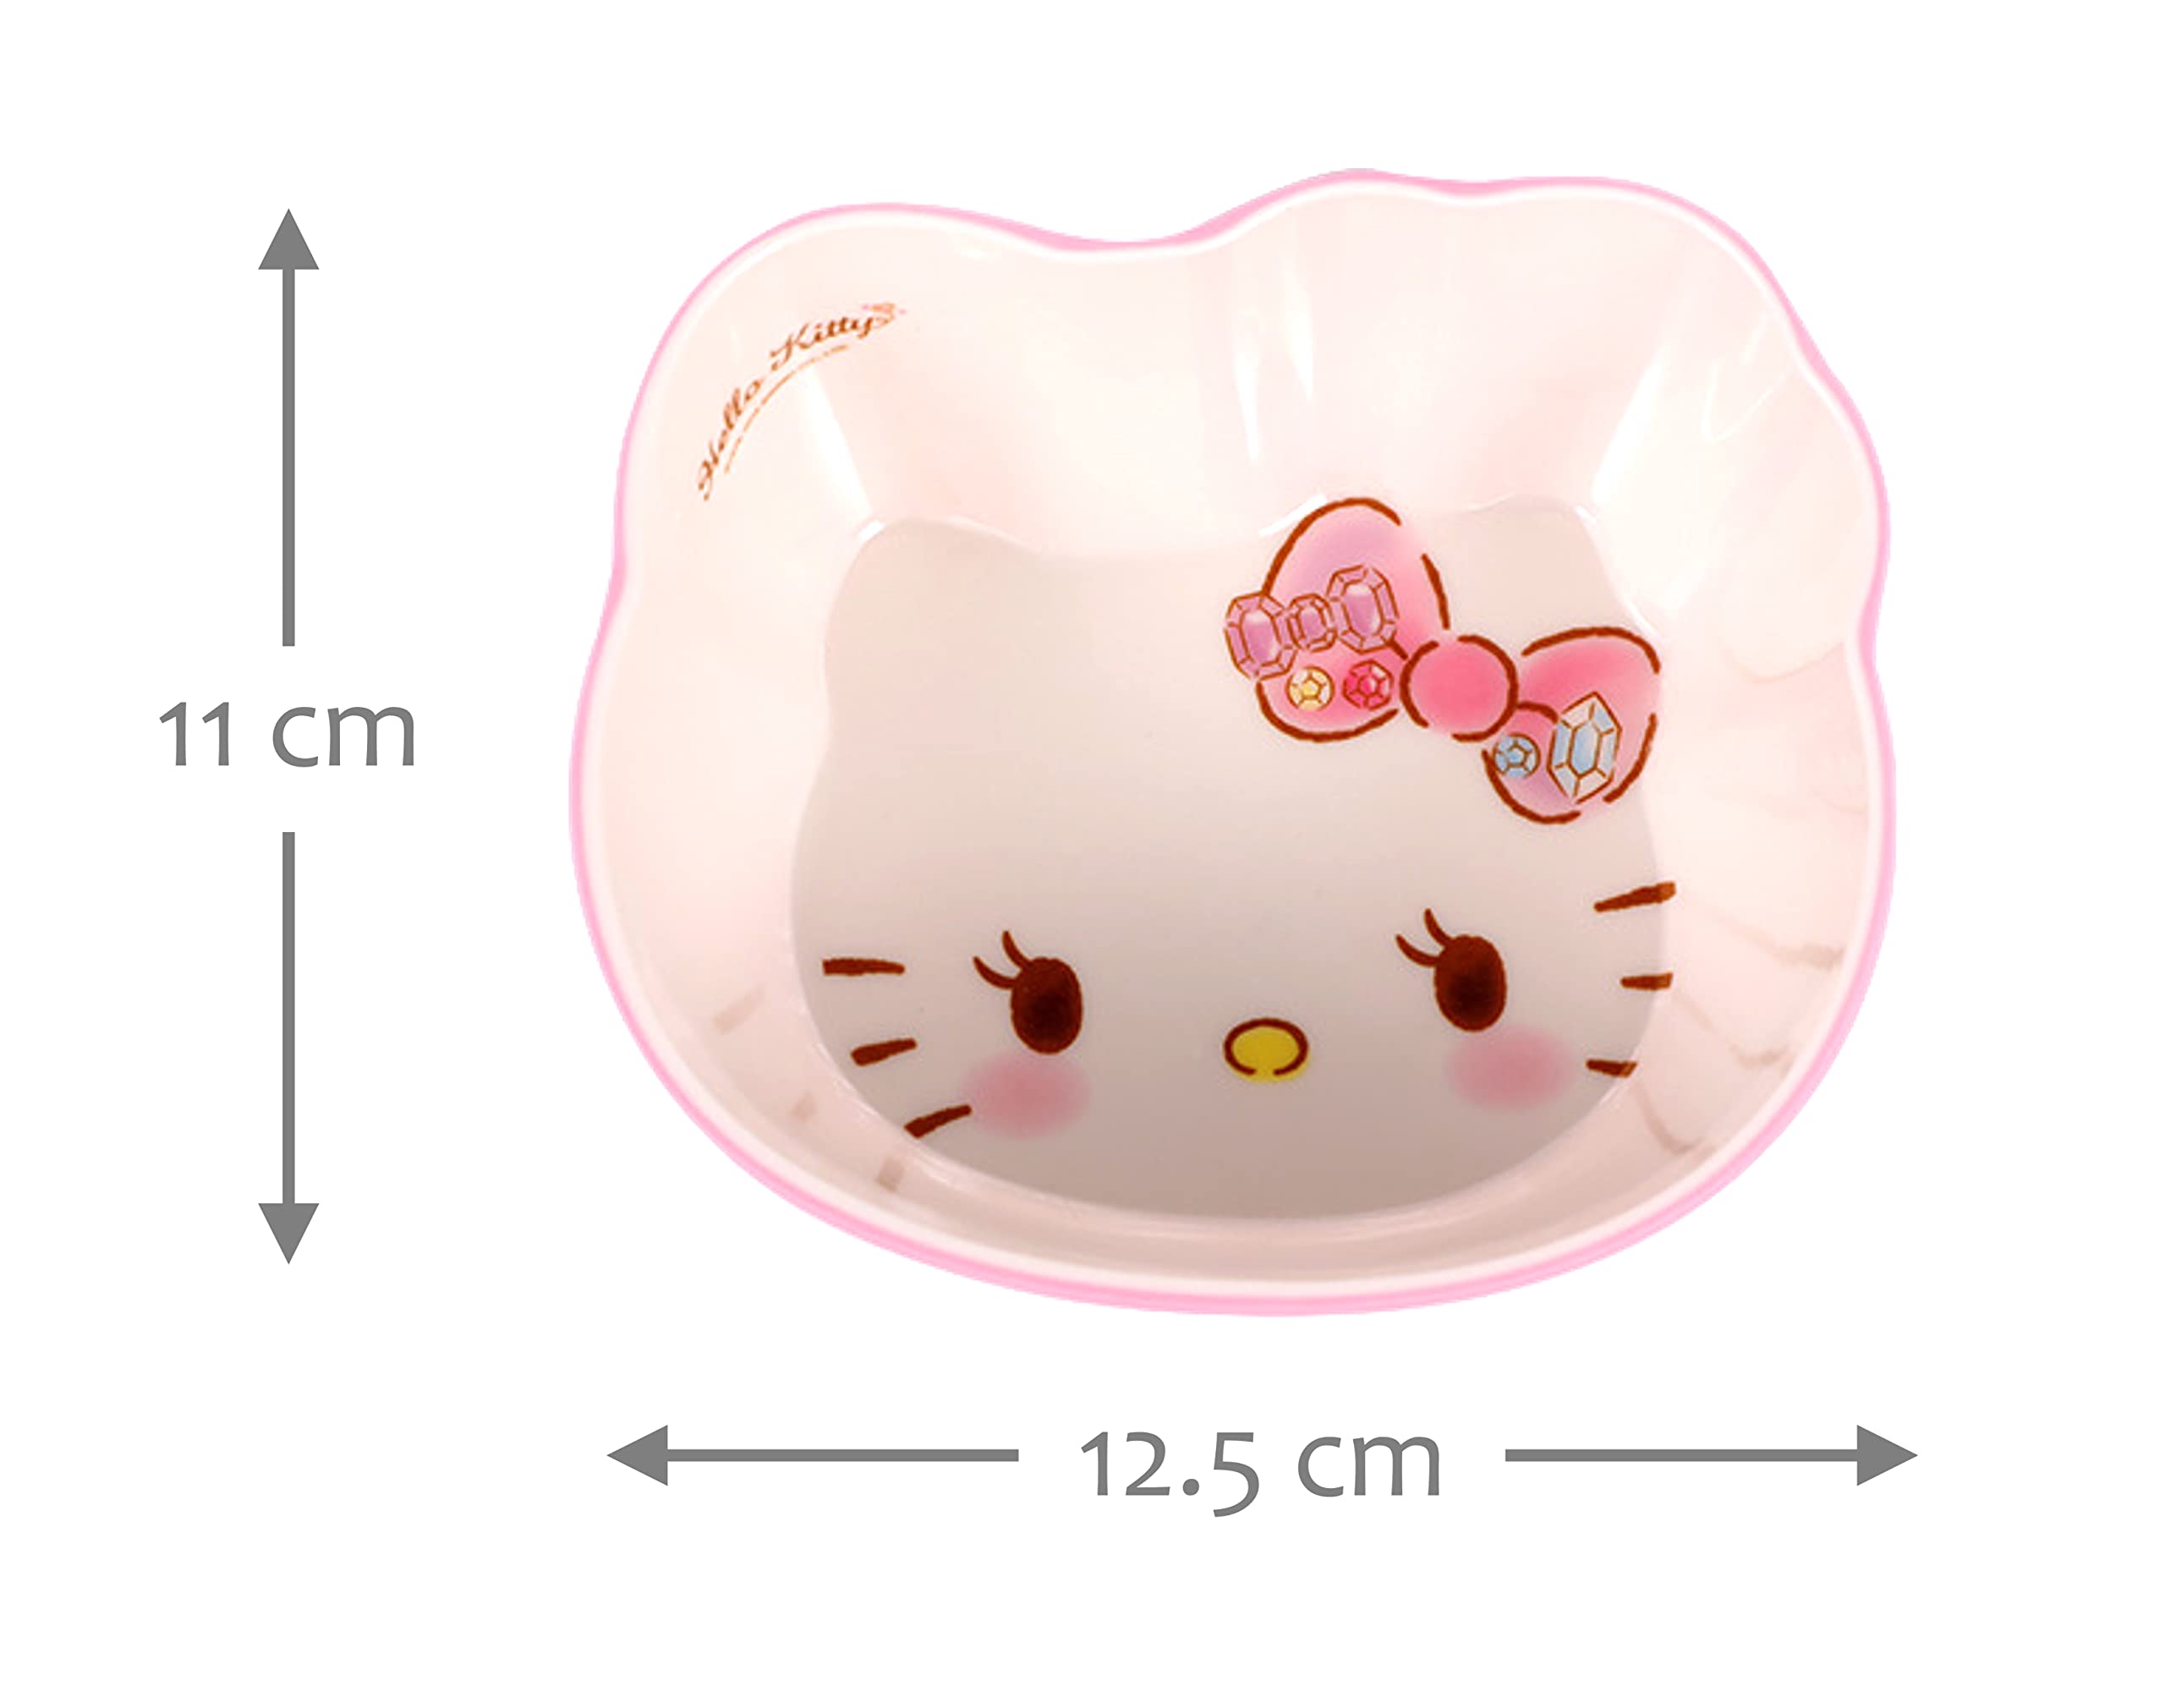 Hello Kitty Cute Deluxe Pink Dinnerware Flatware Meal Set – Plate Bowl Cup Spoon, 4 pieces